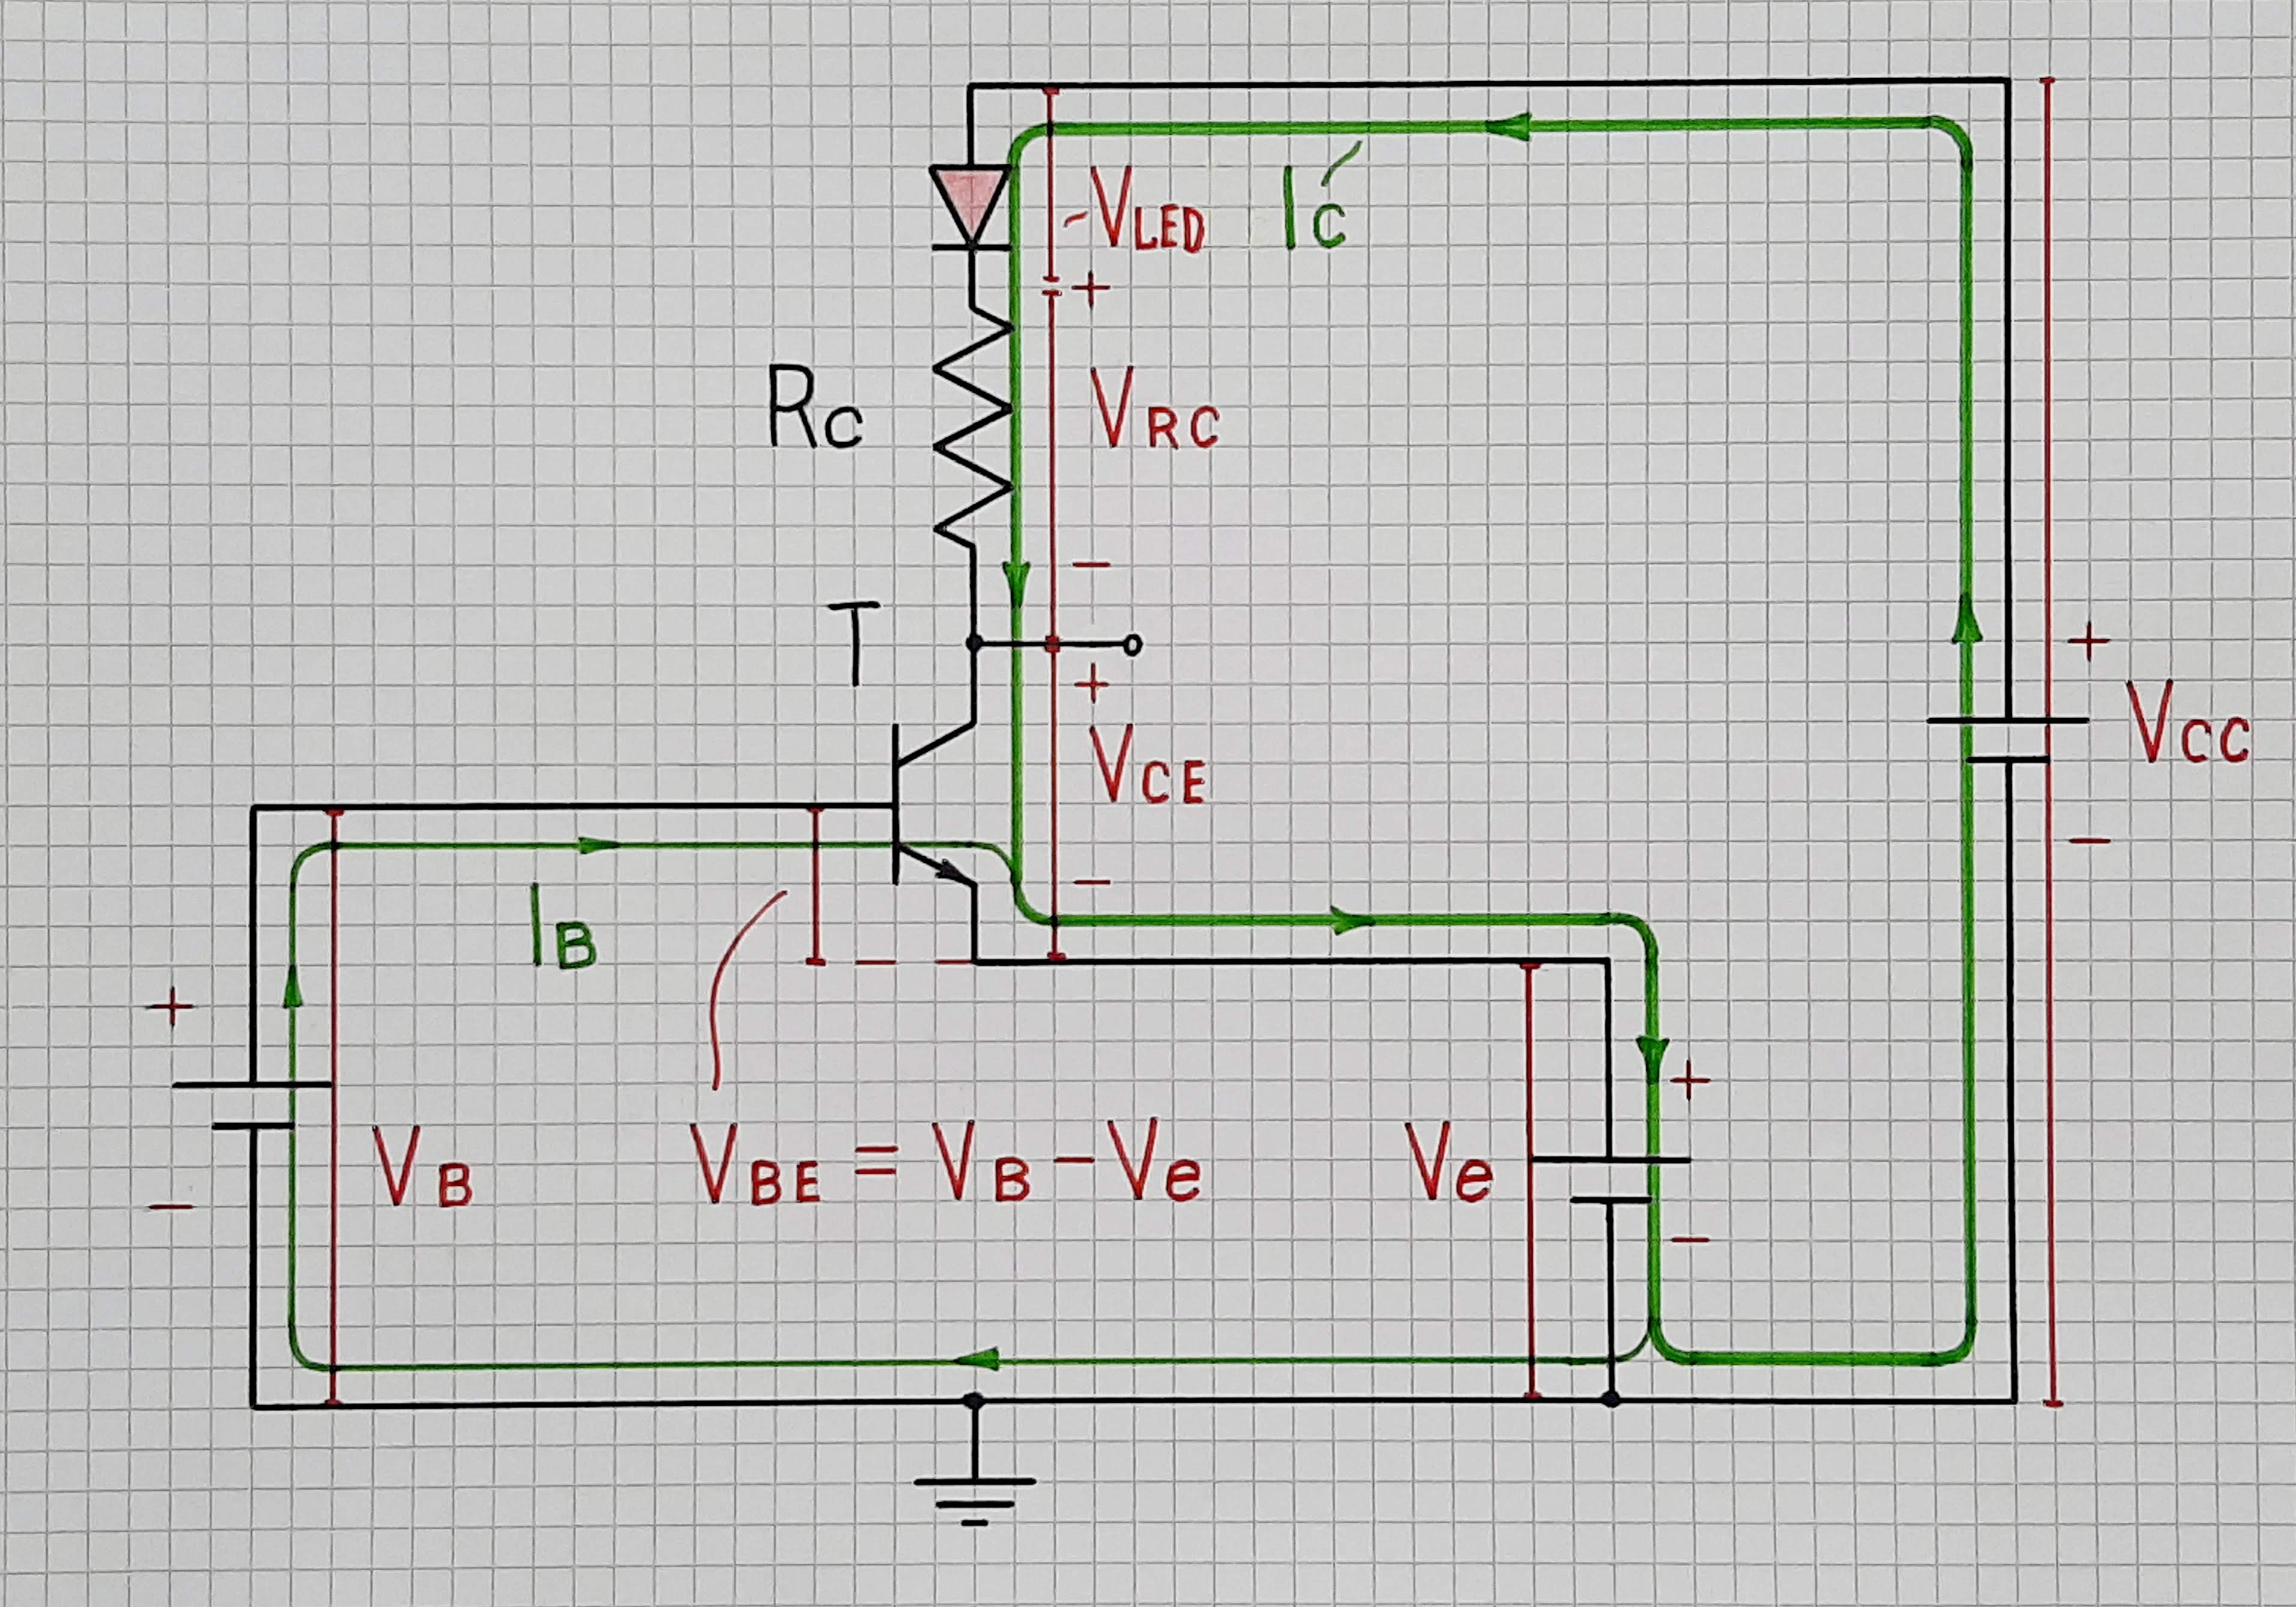 Transistor amplifier with two input voltages and a voltage output; the current is still indicated by an LED